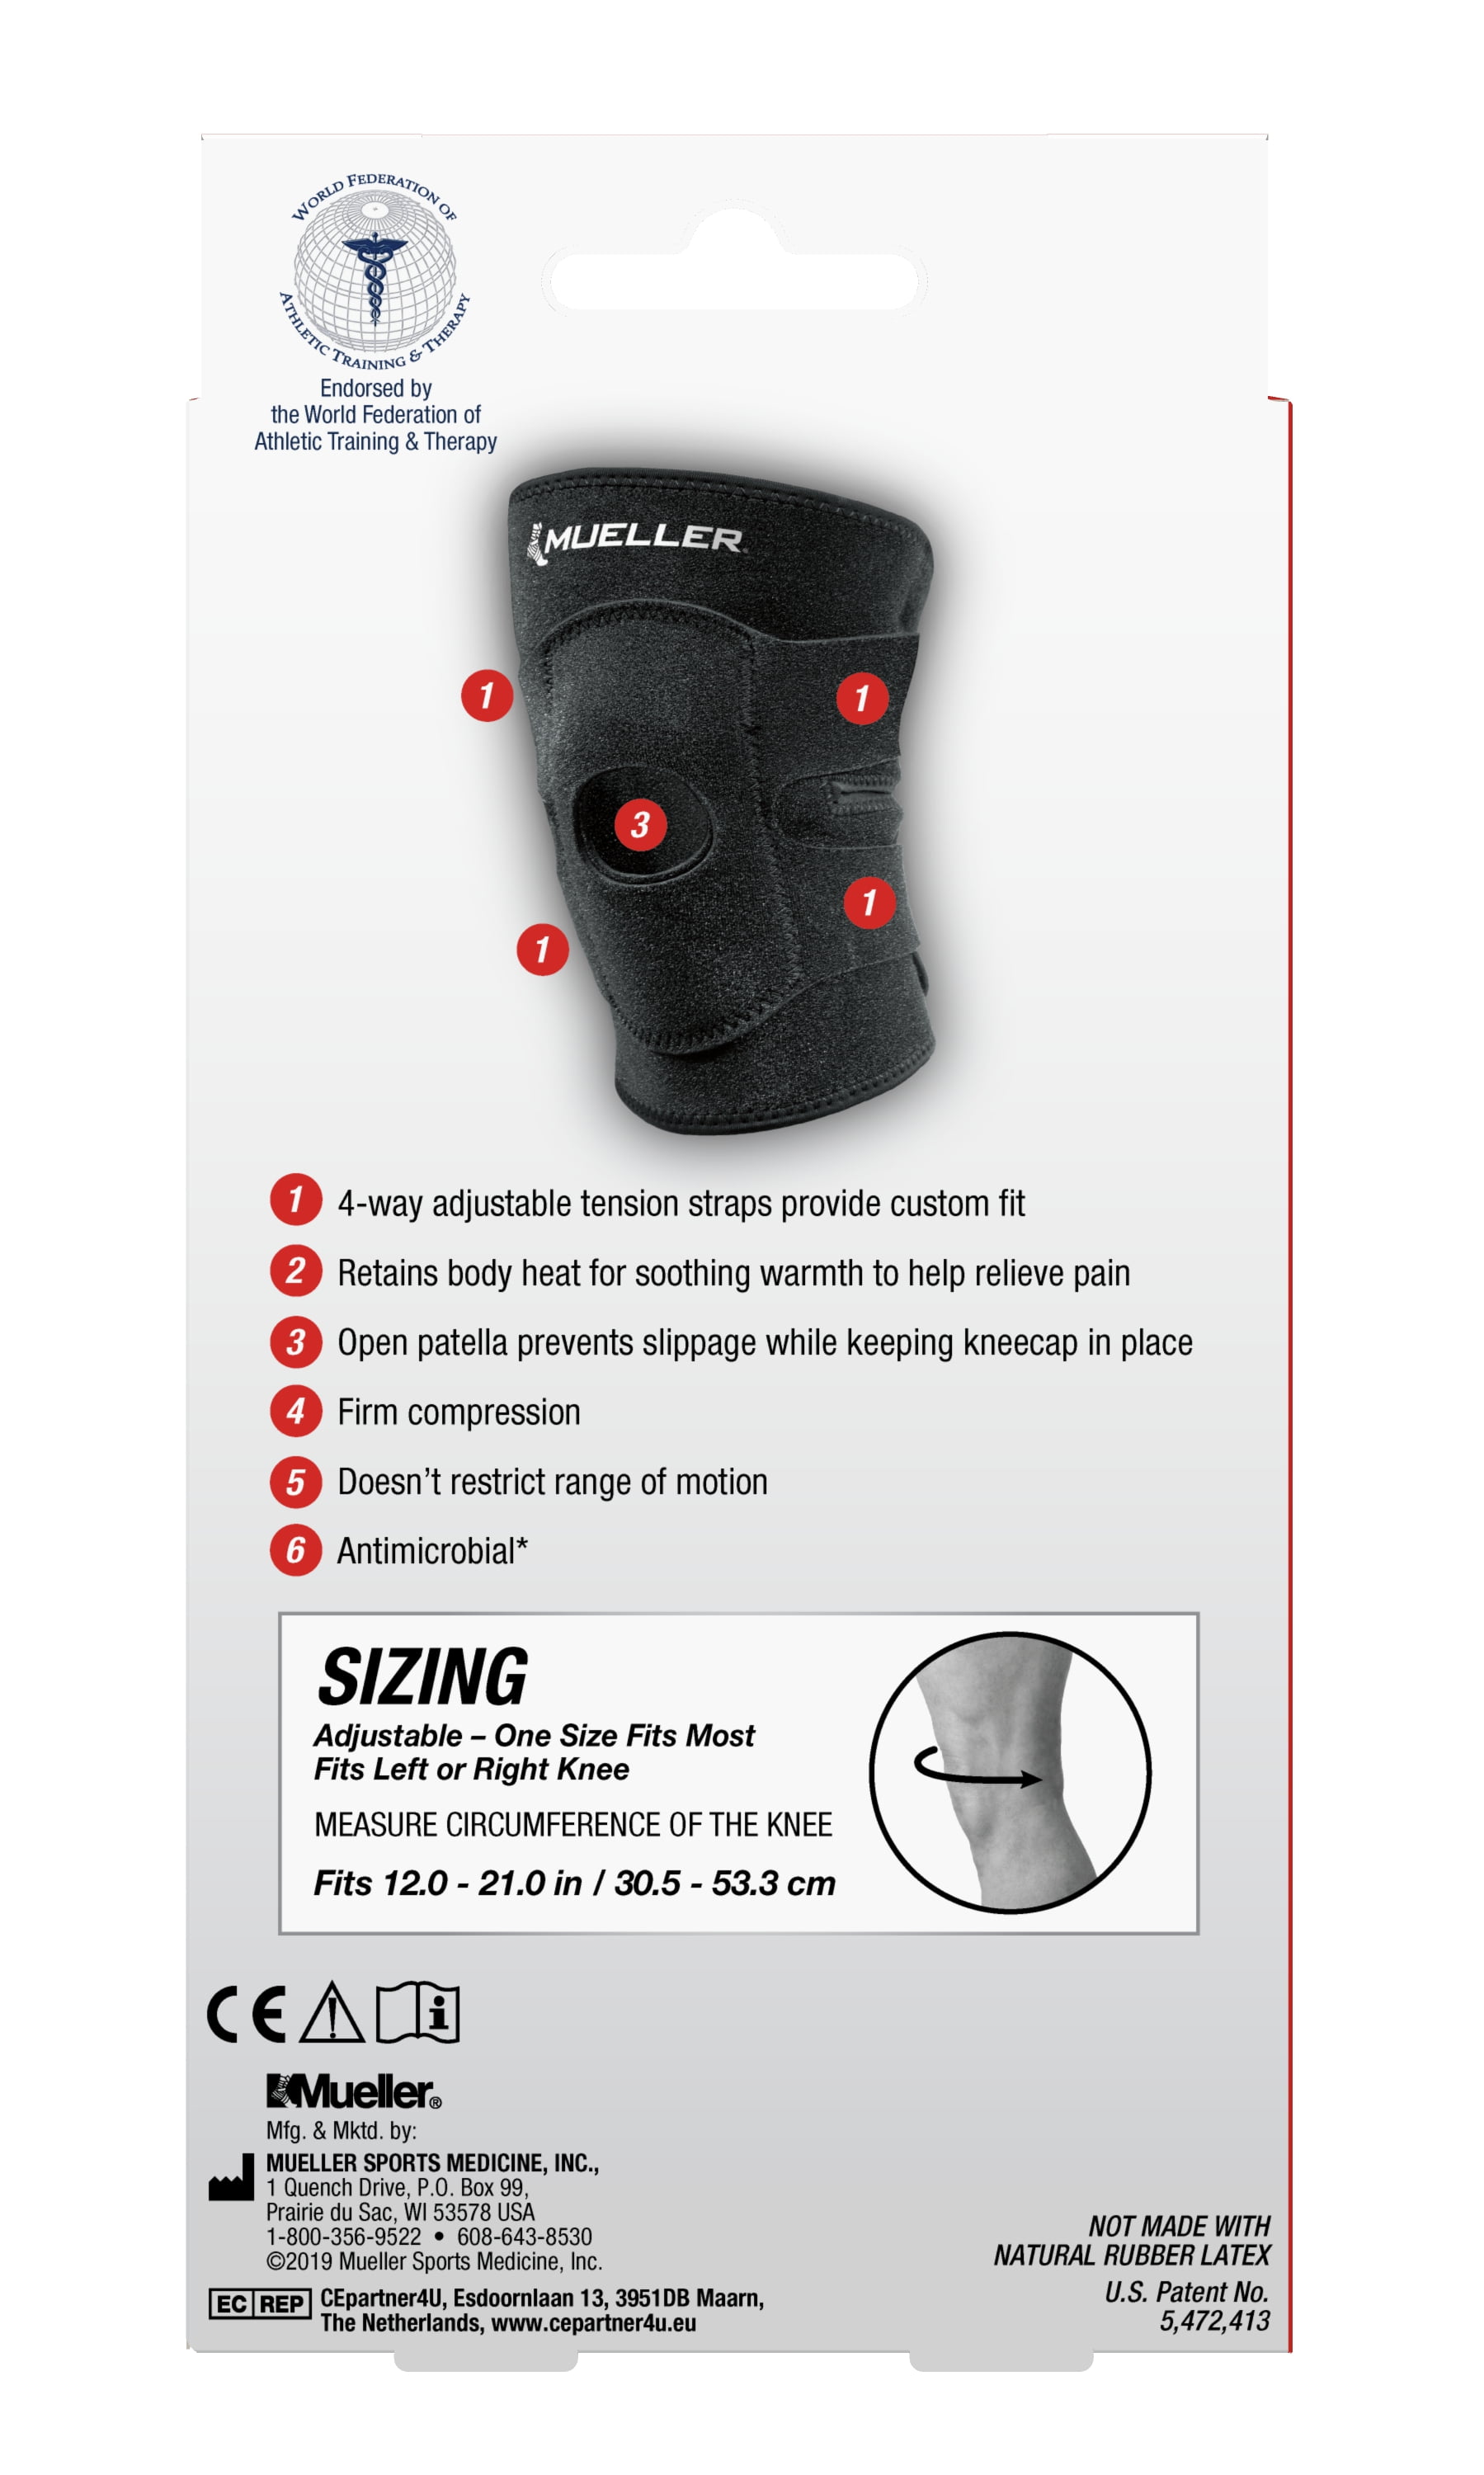 ADJUST-TO-FIT KNEE SUPPORT OSFM, Knee Braces & Sleeves, By Body Part, Open Catalog